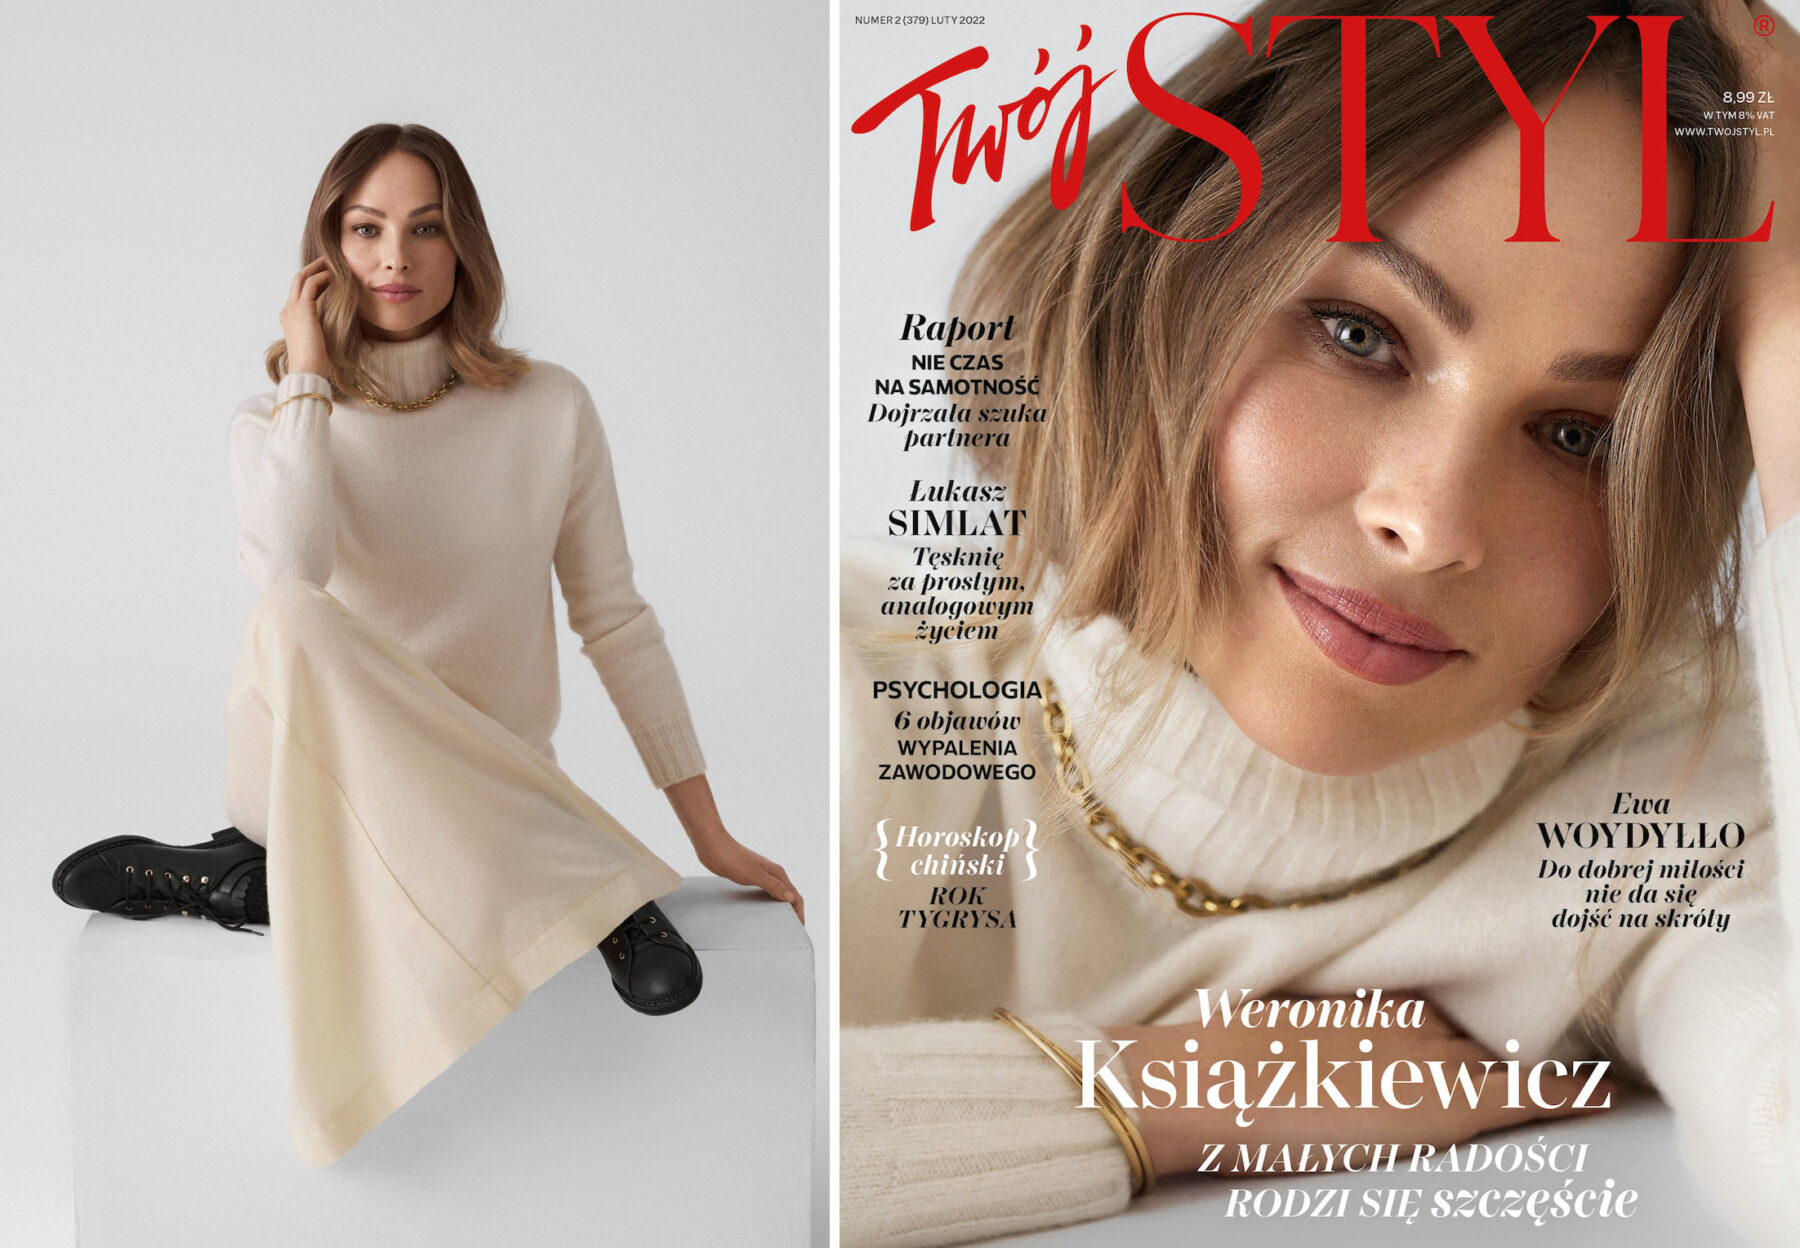 Cover story for Twój Styl photographed by Ala Wesołowska